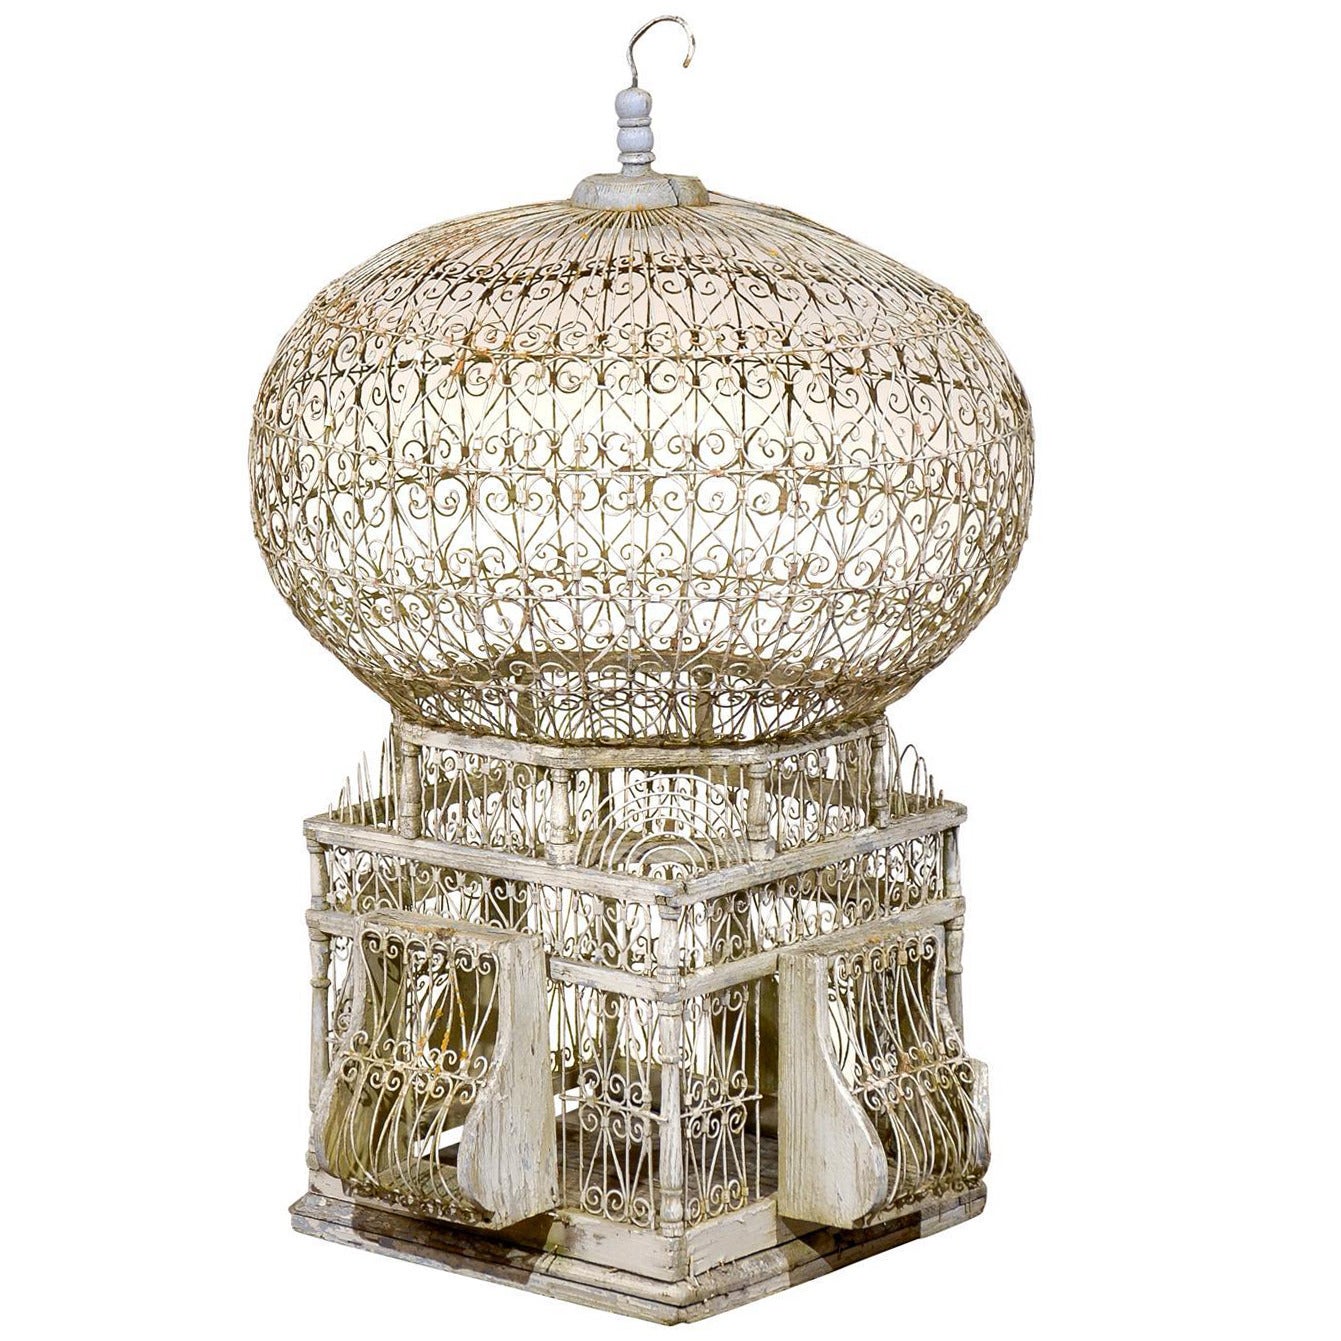   Vintage White French Birdcage, Circa 1910 For Sale